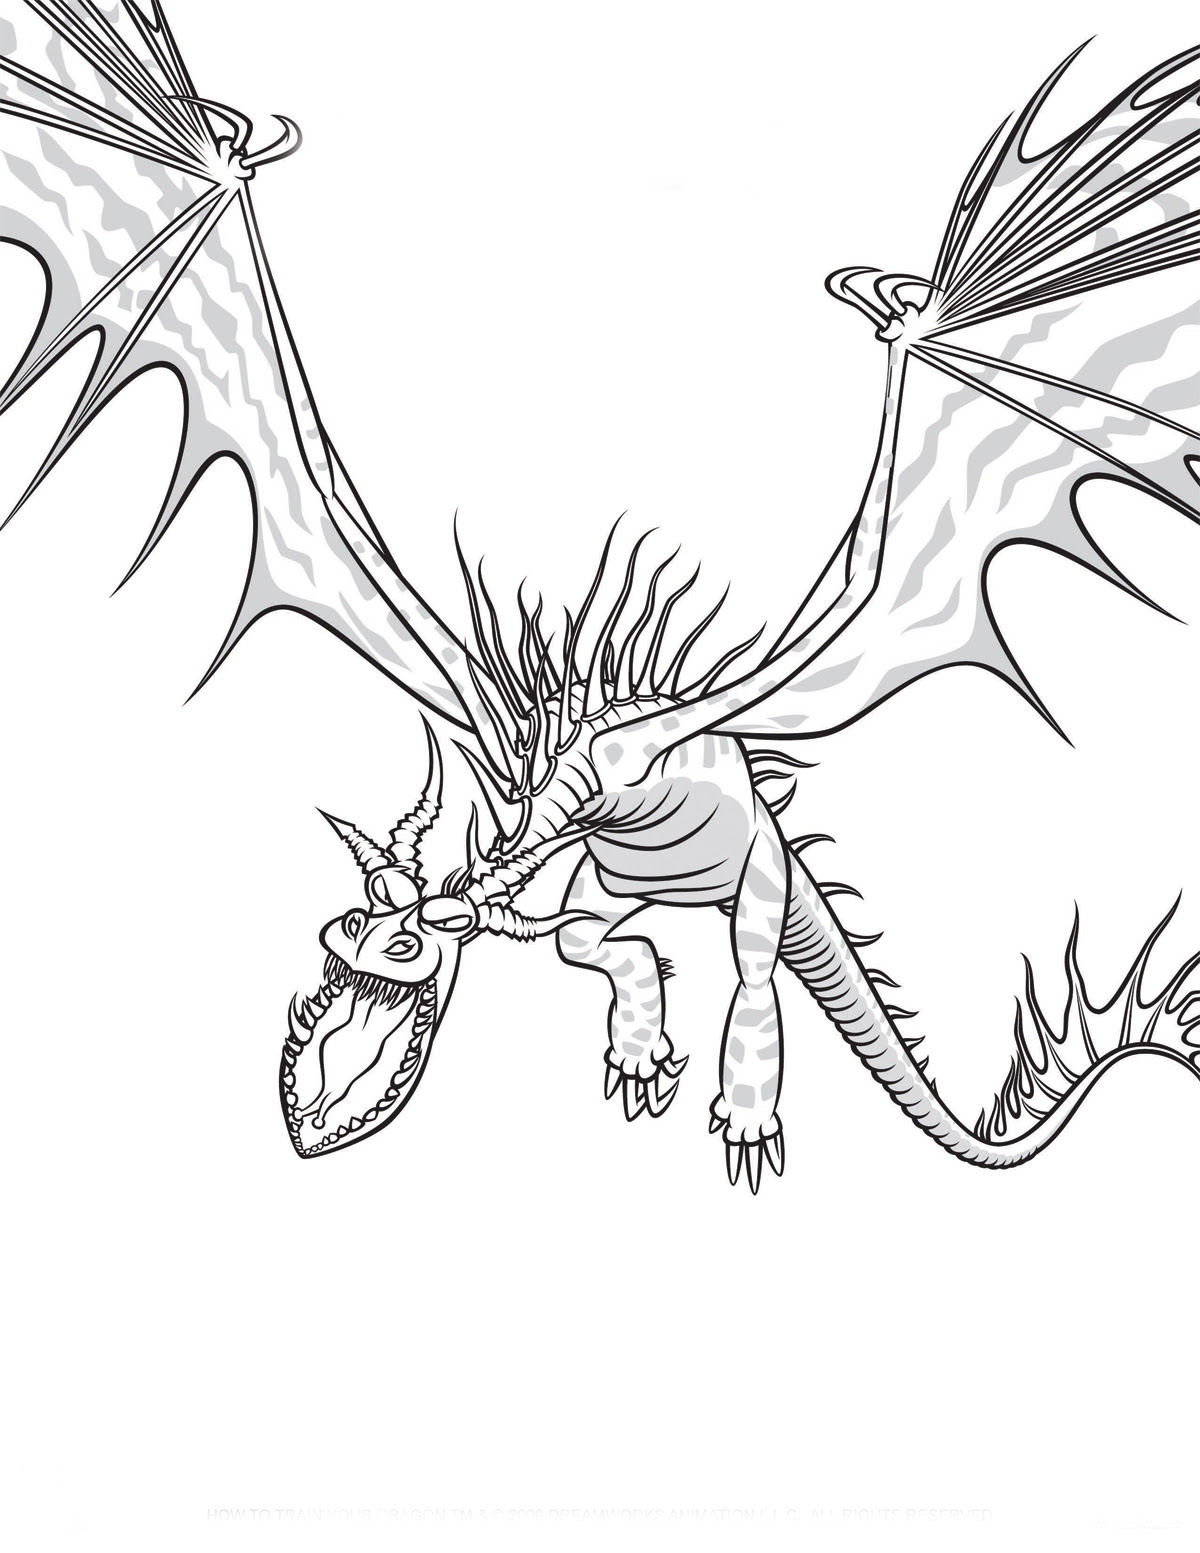 Coloring Page Dragon Riders - 242+ Crafter Files